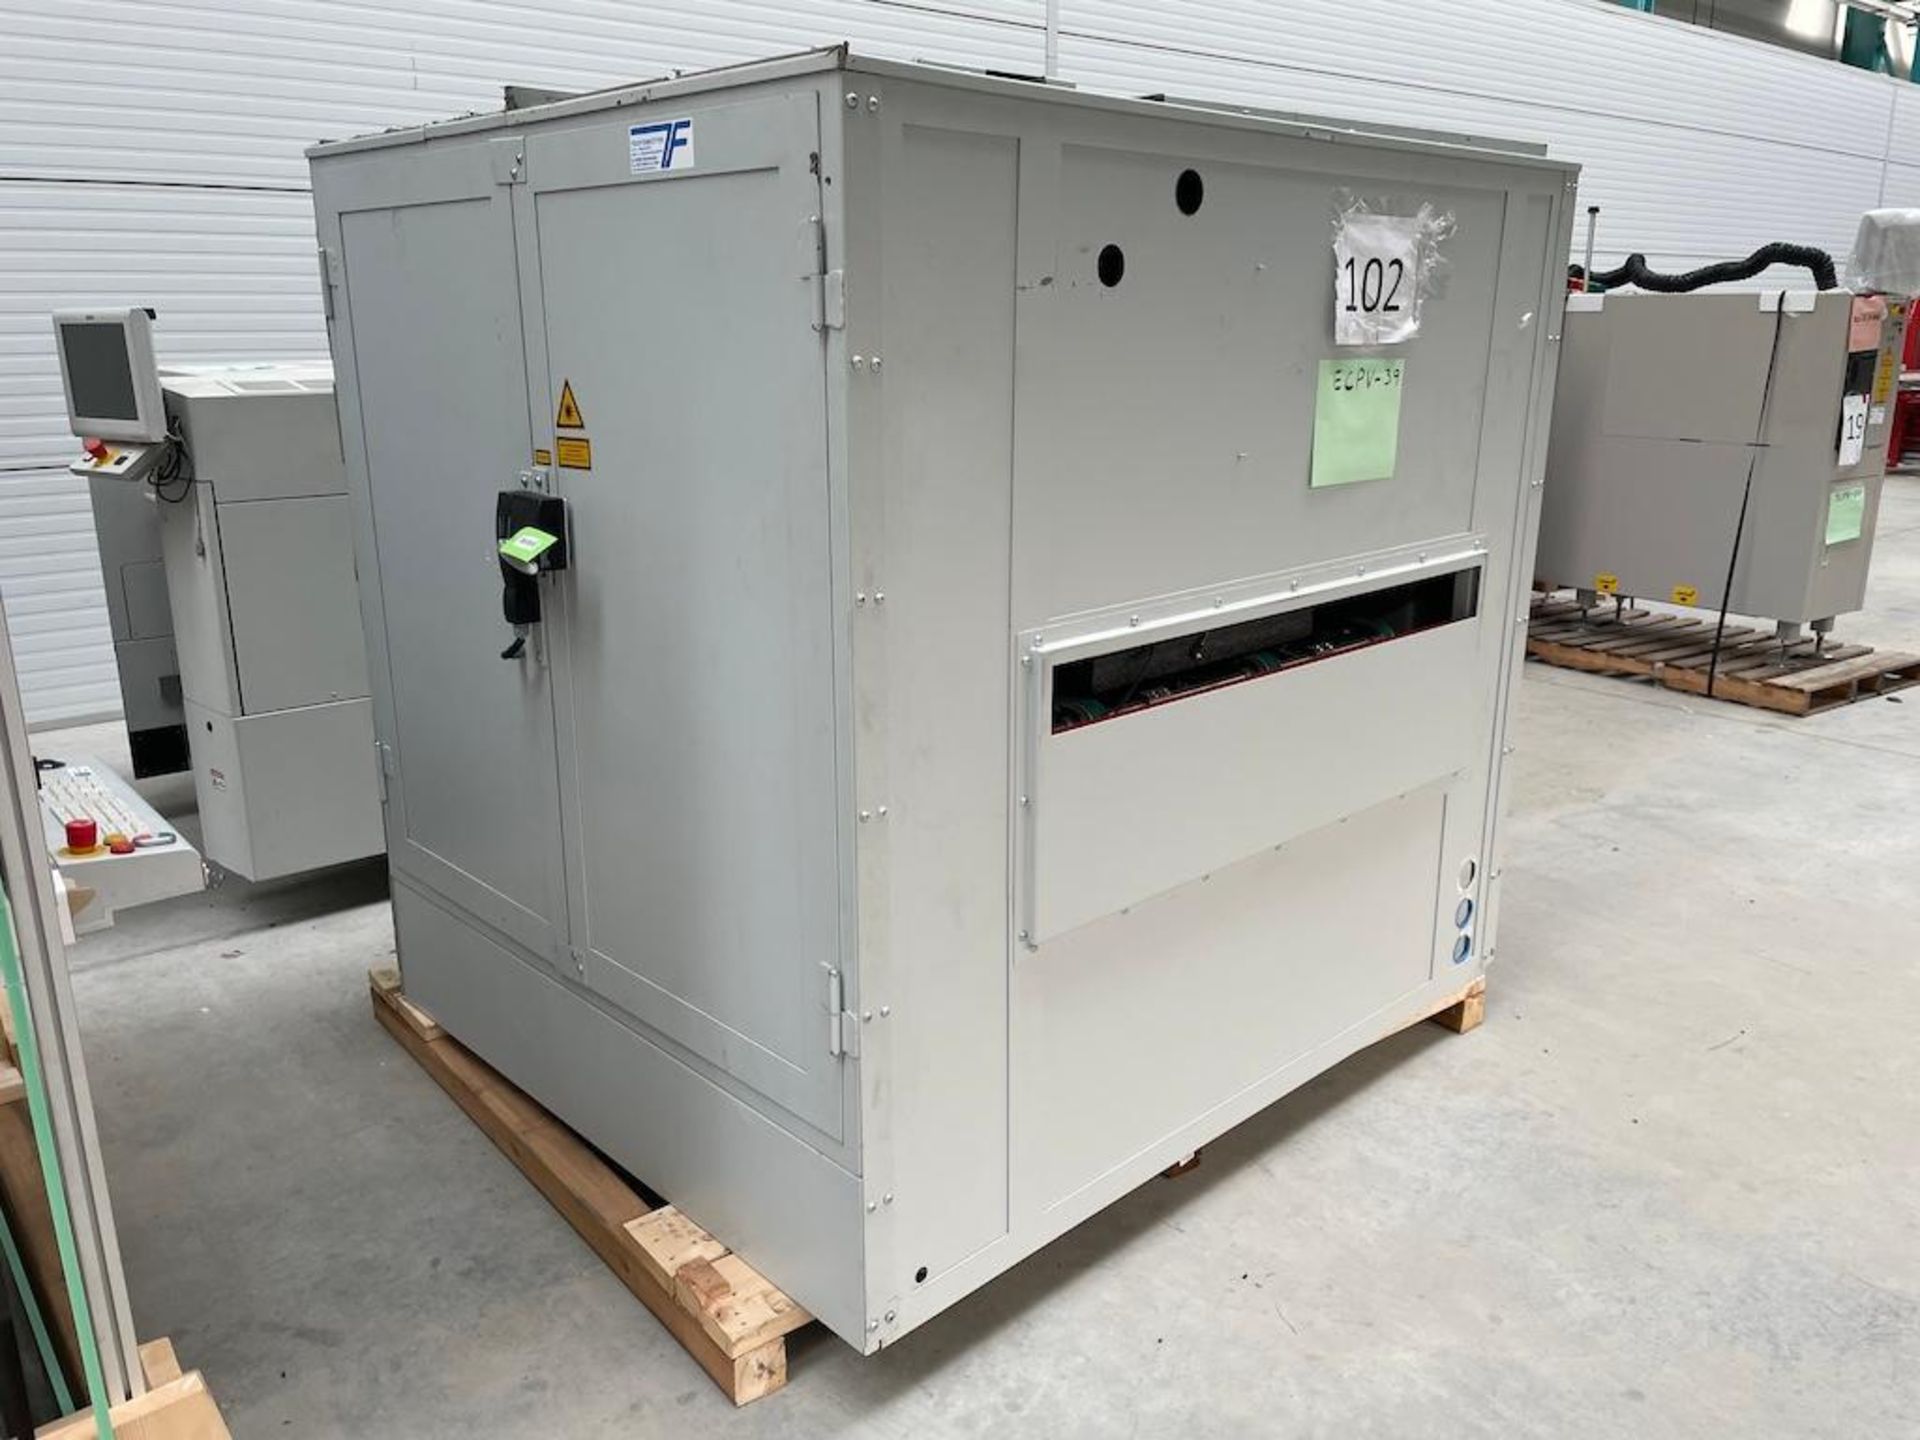 FUCHTENKOTTER LASER INSPECTION STATION, 4 FT TRAY CAPACITY [102] [MATANE] *PLEASE NOTE, EXCLUSIVE RI - Image 2 of 6